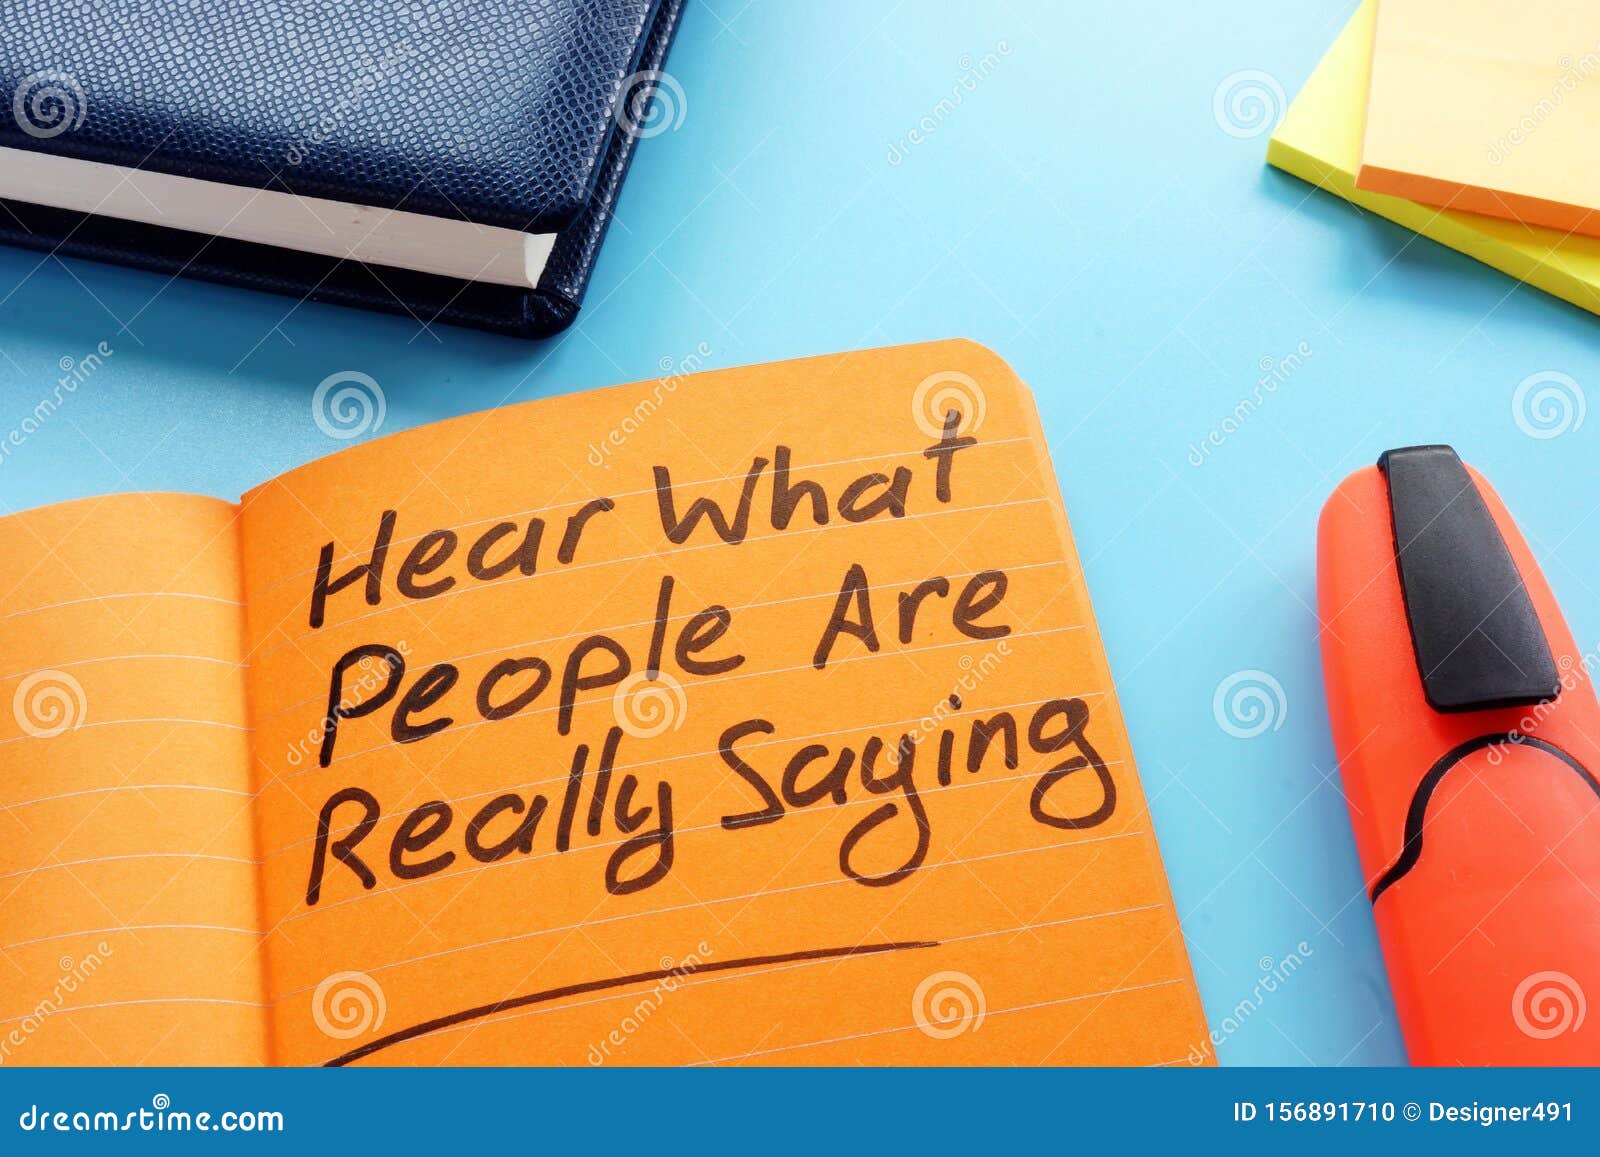 hear what people are really saying sign. active listening technique concept